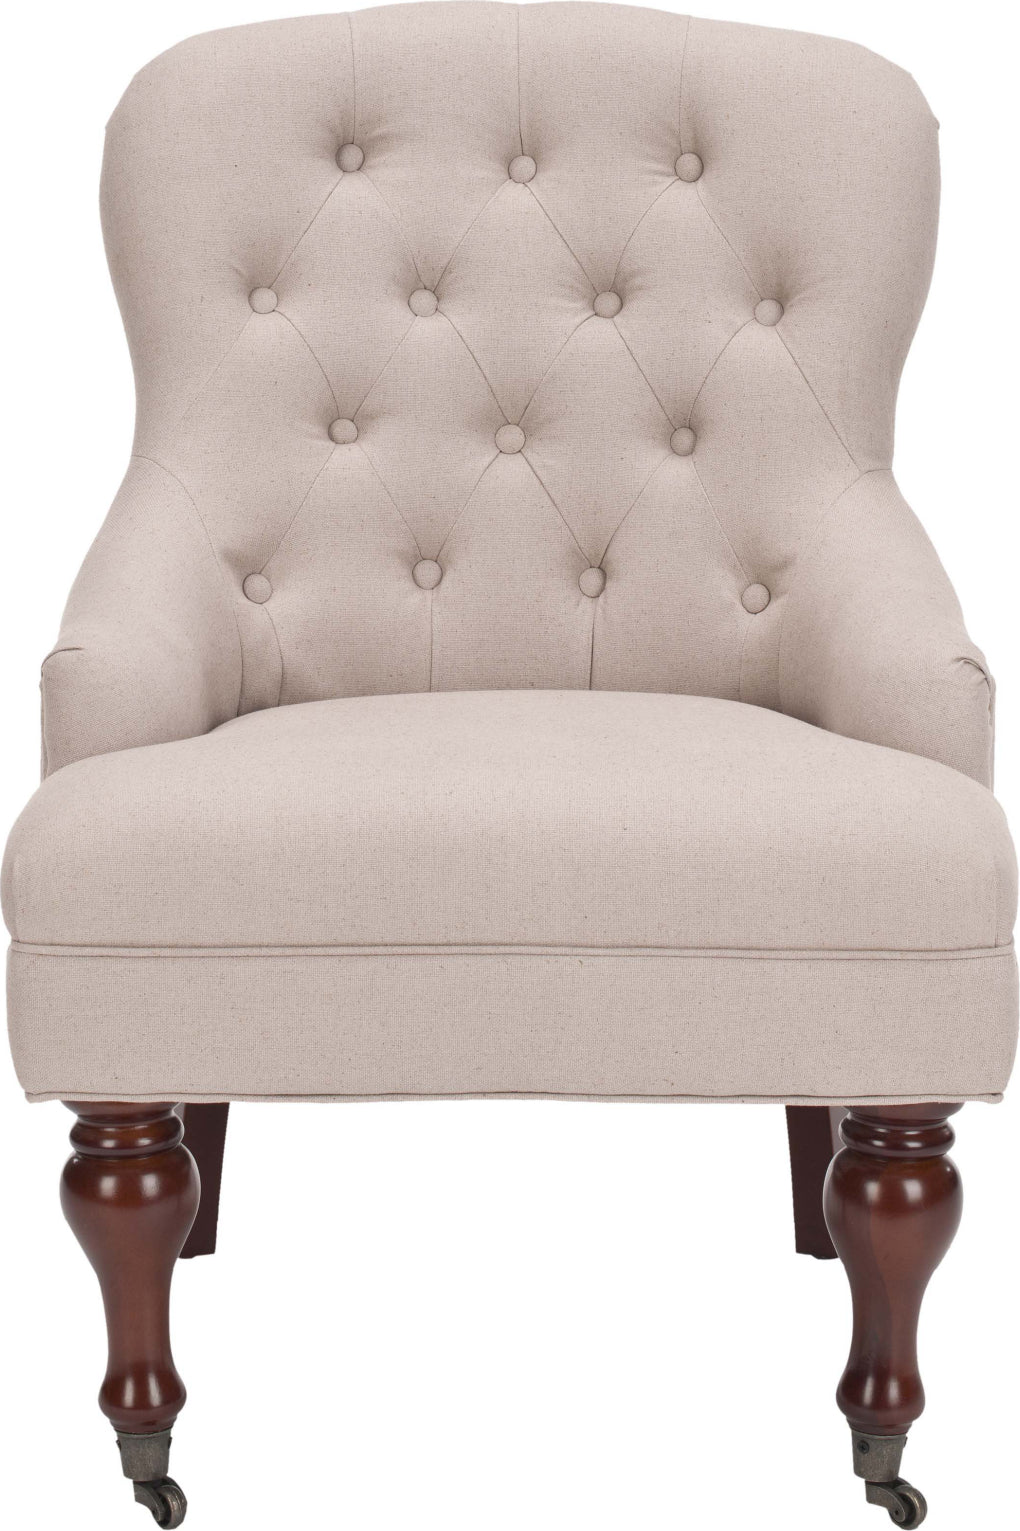 Safavieh Falcon Tufted Arm Chair Taupe and Cherry Mahogany Furniture main image